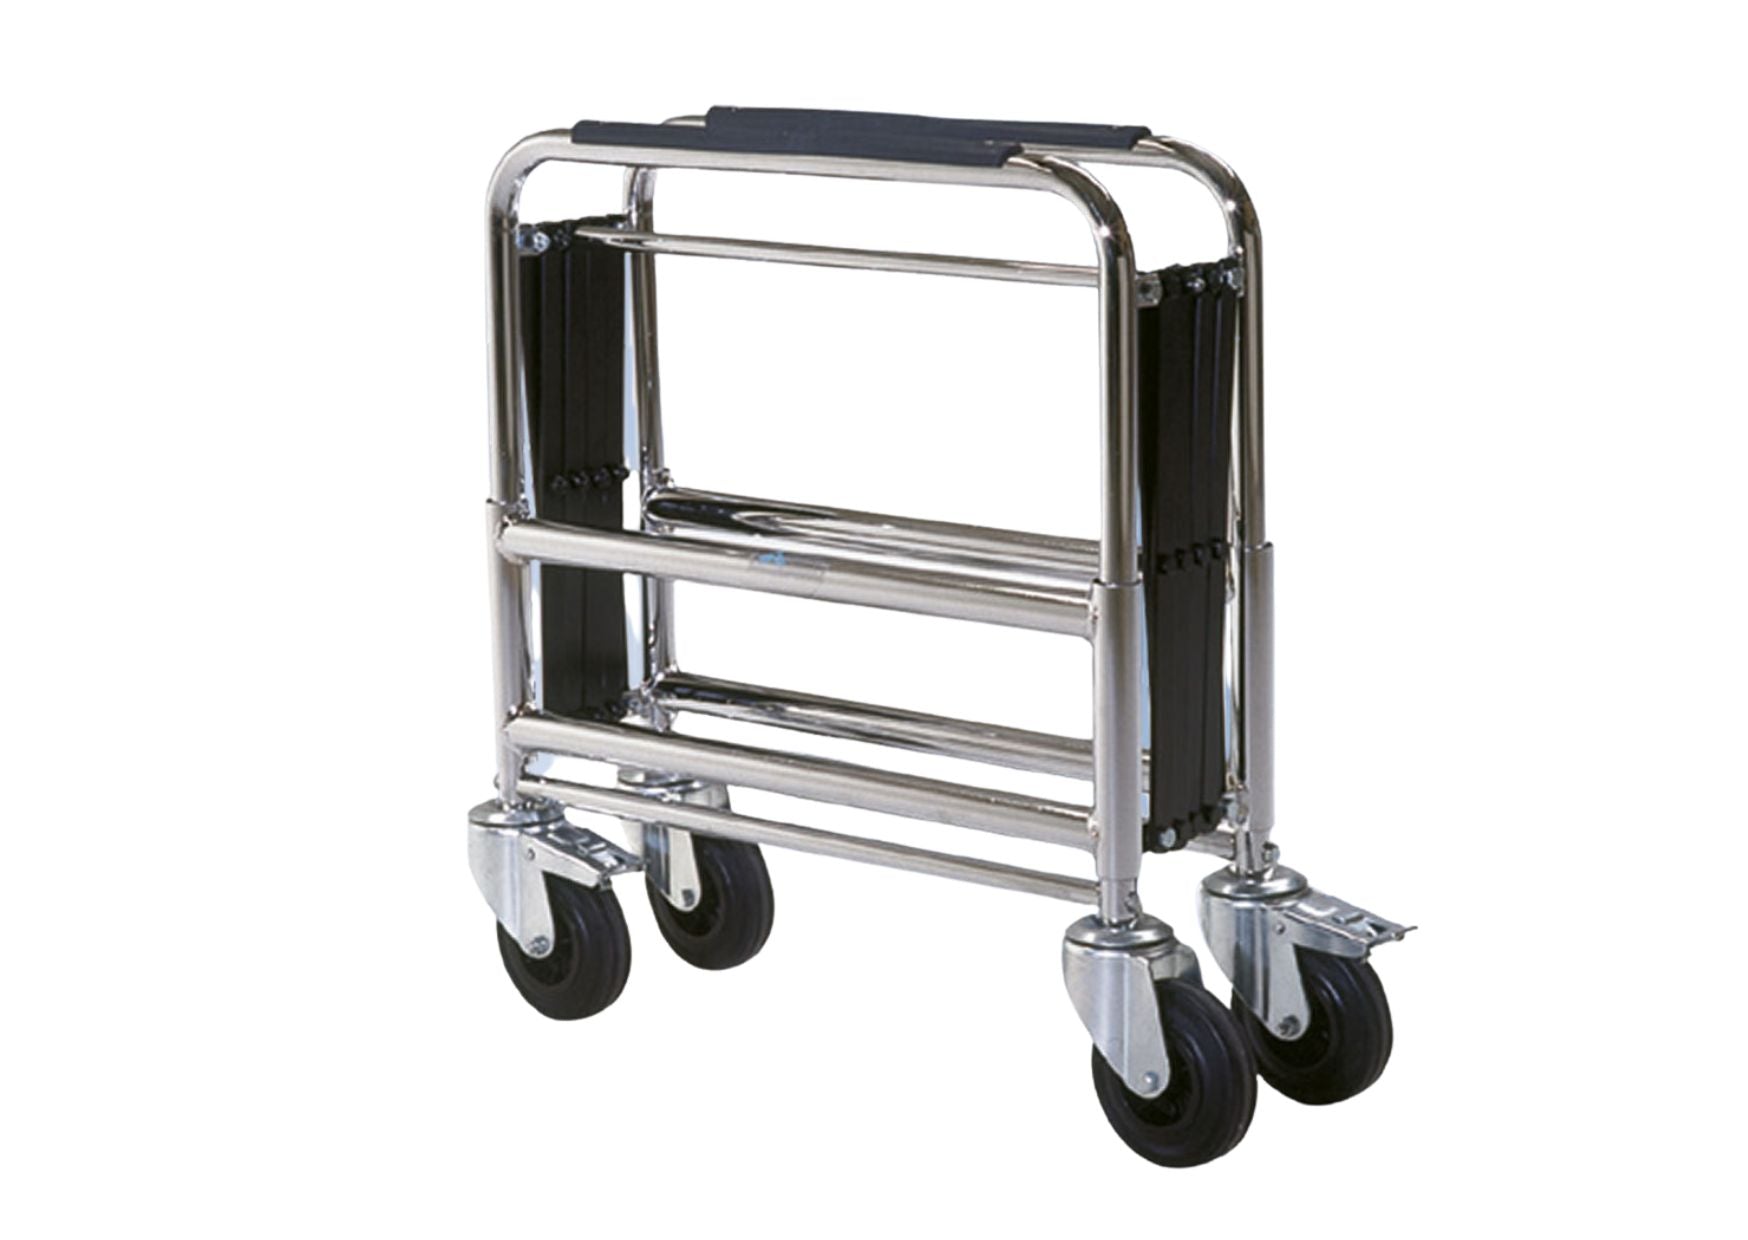 Scissor trolley can be pulled apart lengthways